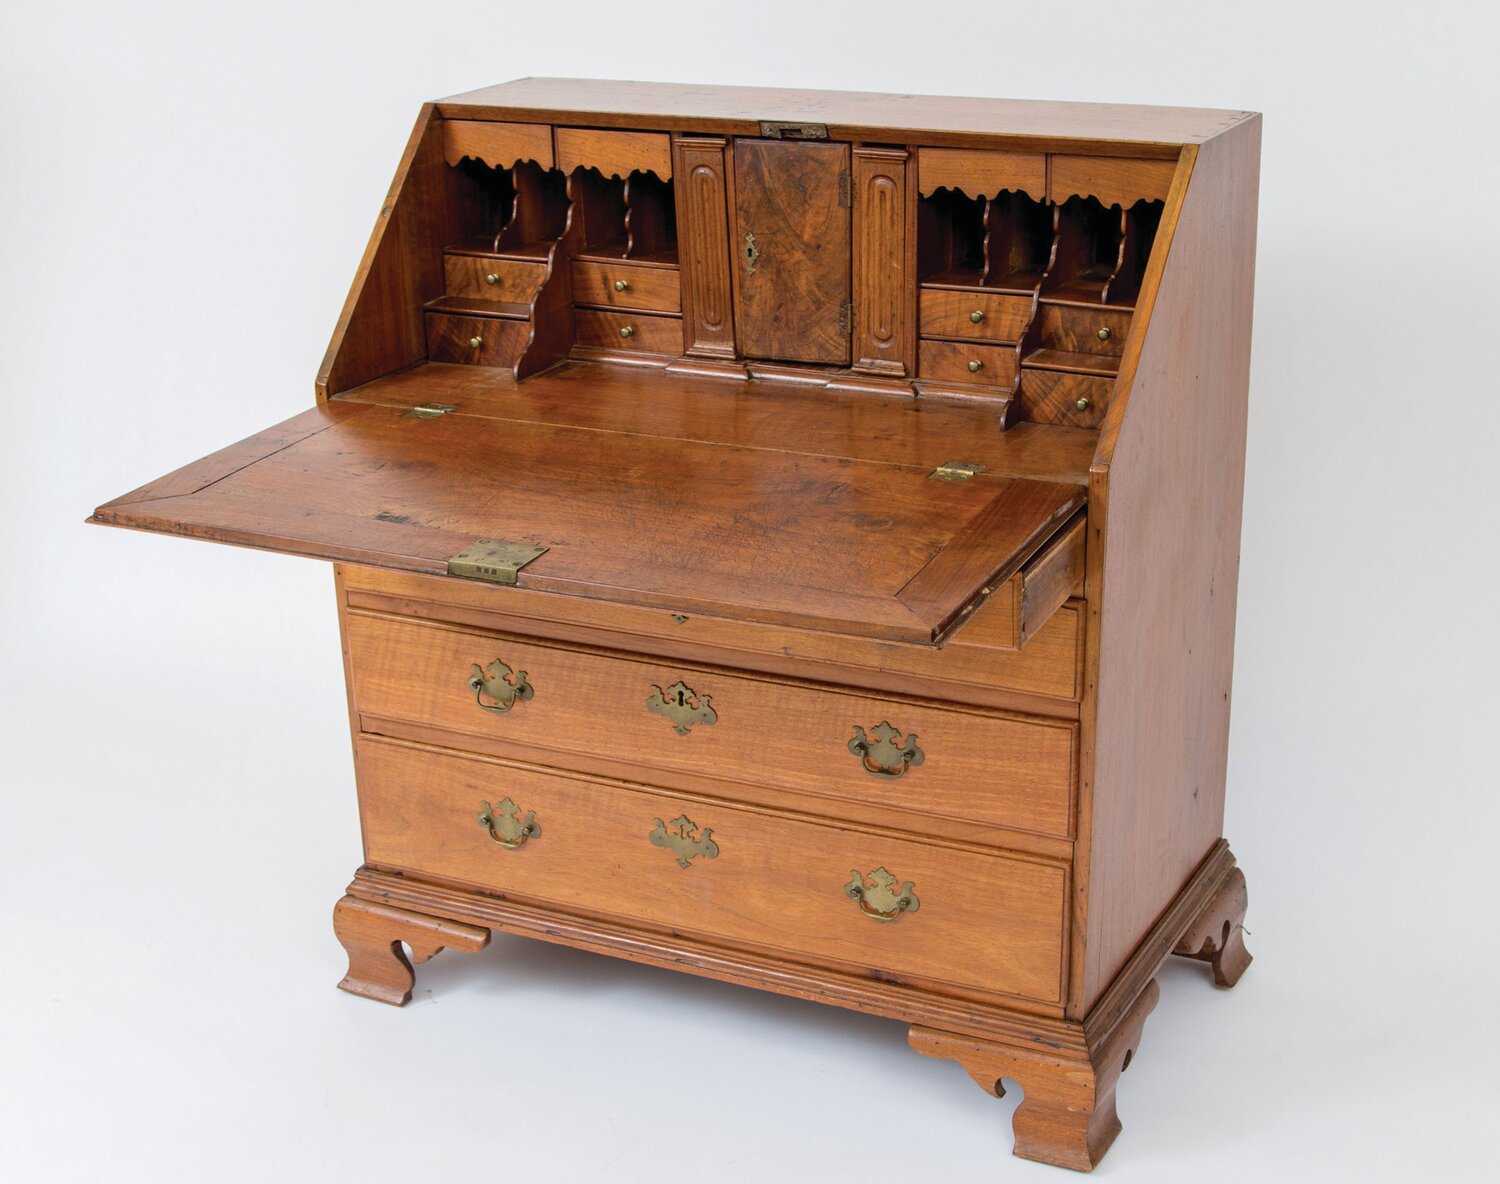 The original desk from the Bucks County Treasury robbery in Newtown, on loan courtesy of Christine Carleton.